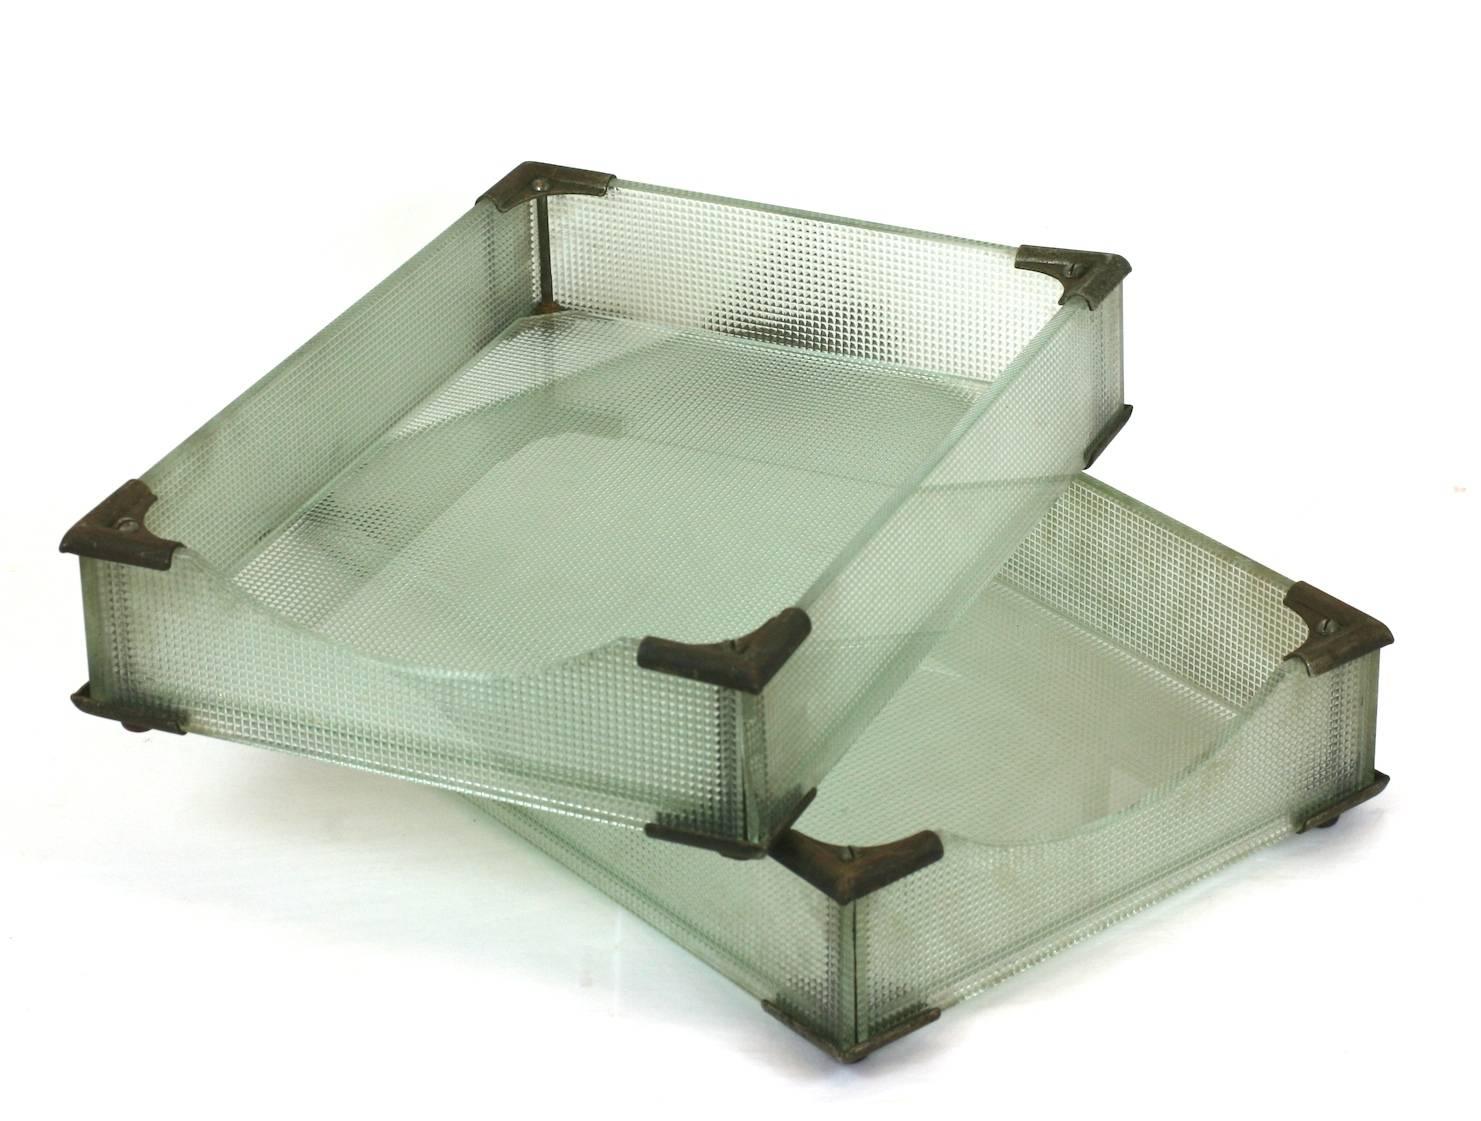 Attractive Art Deco glass paper holders in waffled sea green glass with slightly rusted Industrial corner fittings, 1930s, USA. Measure: 10.5